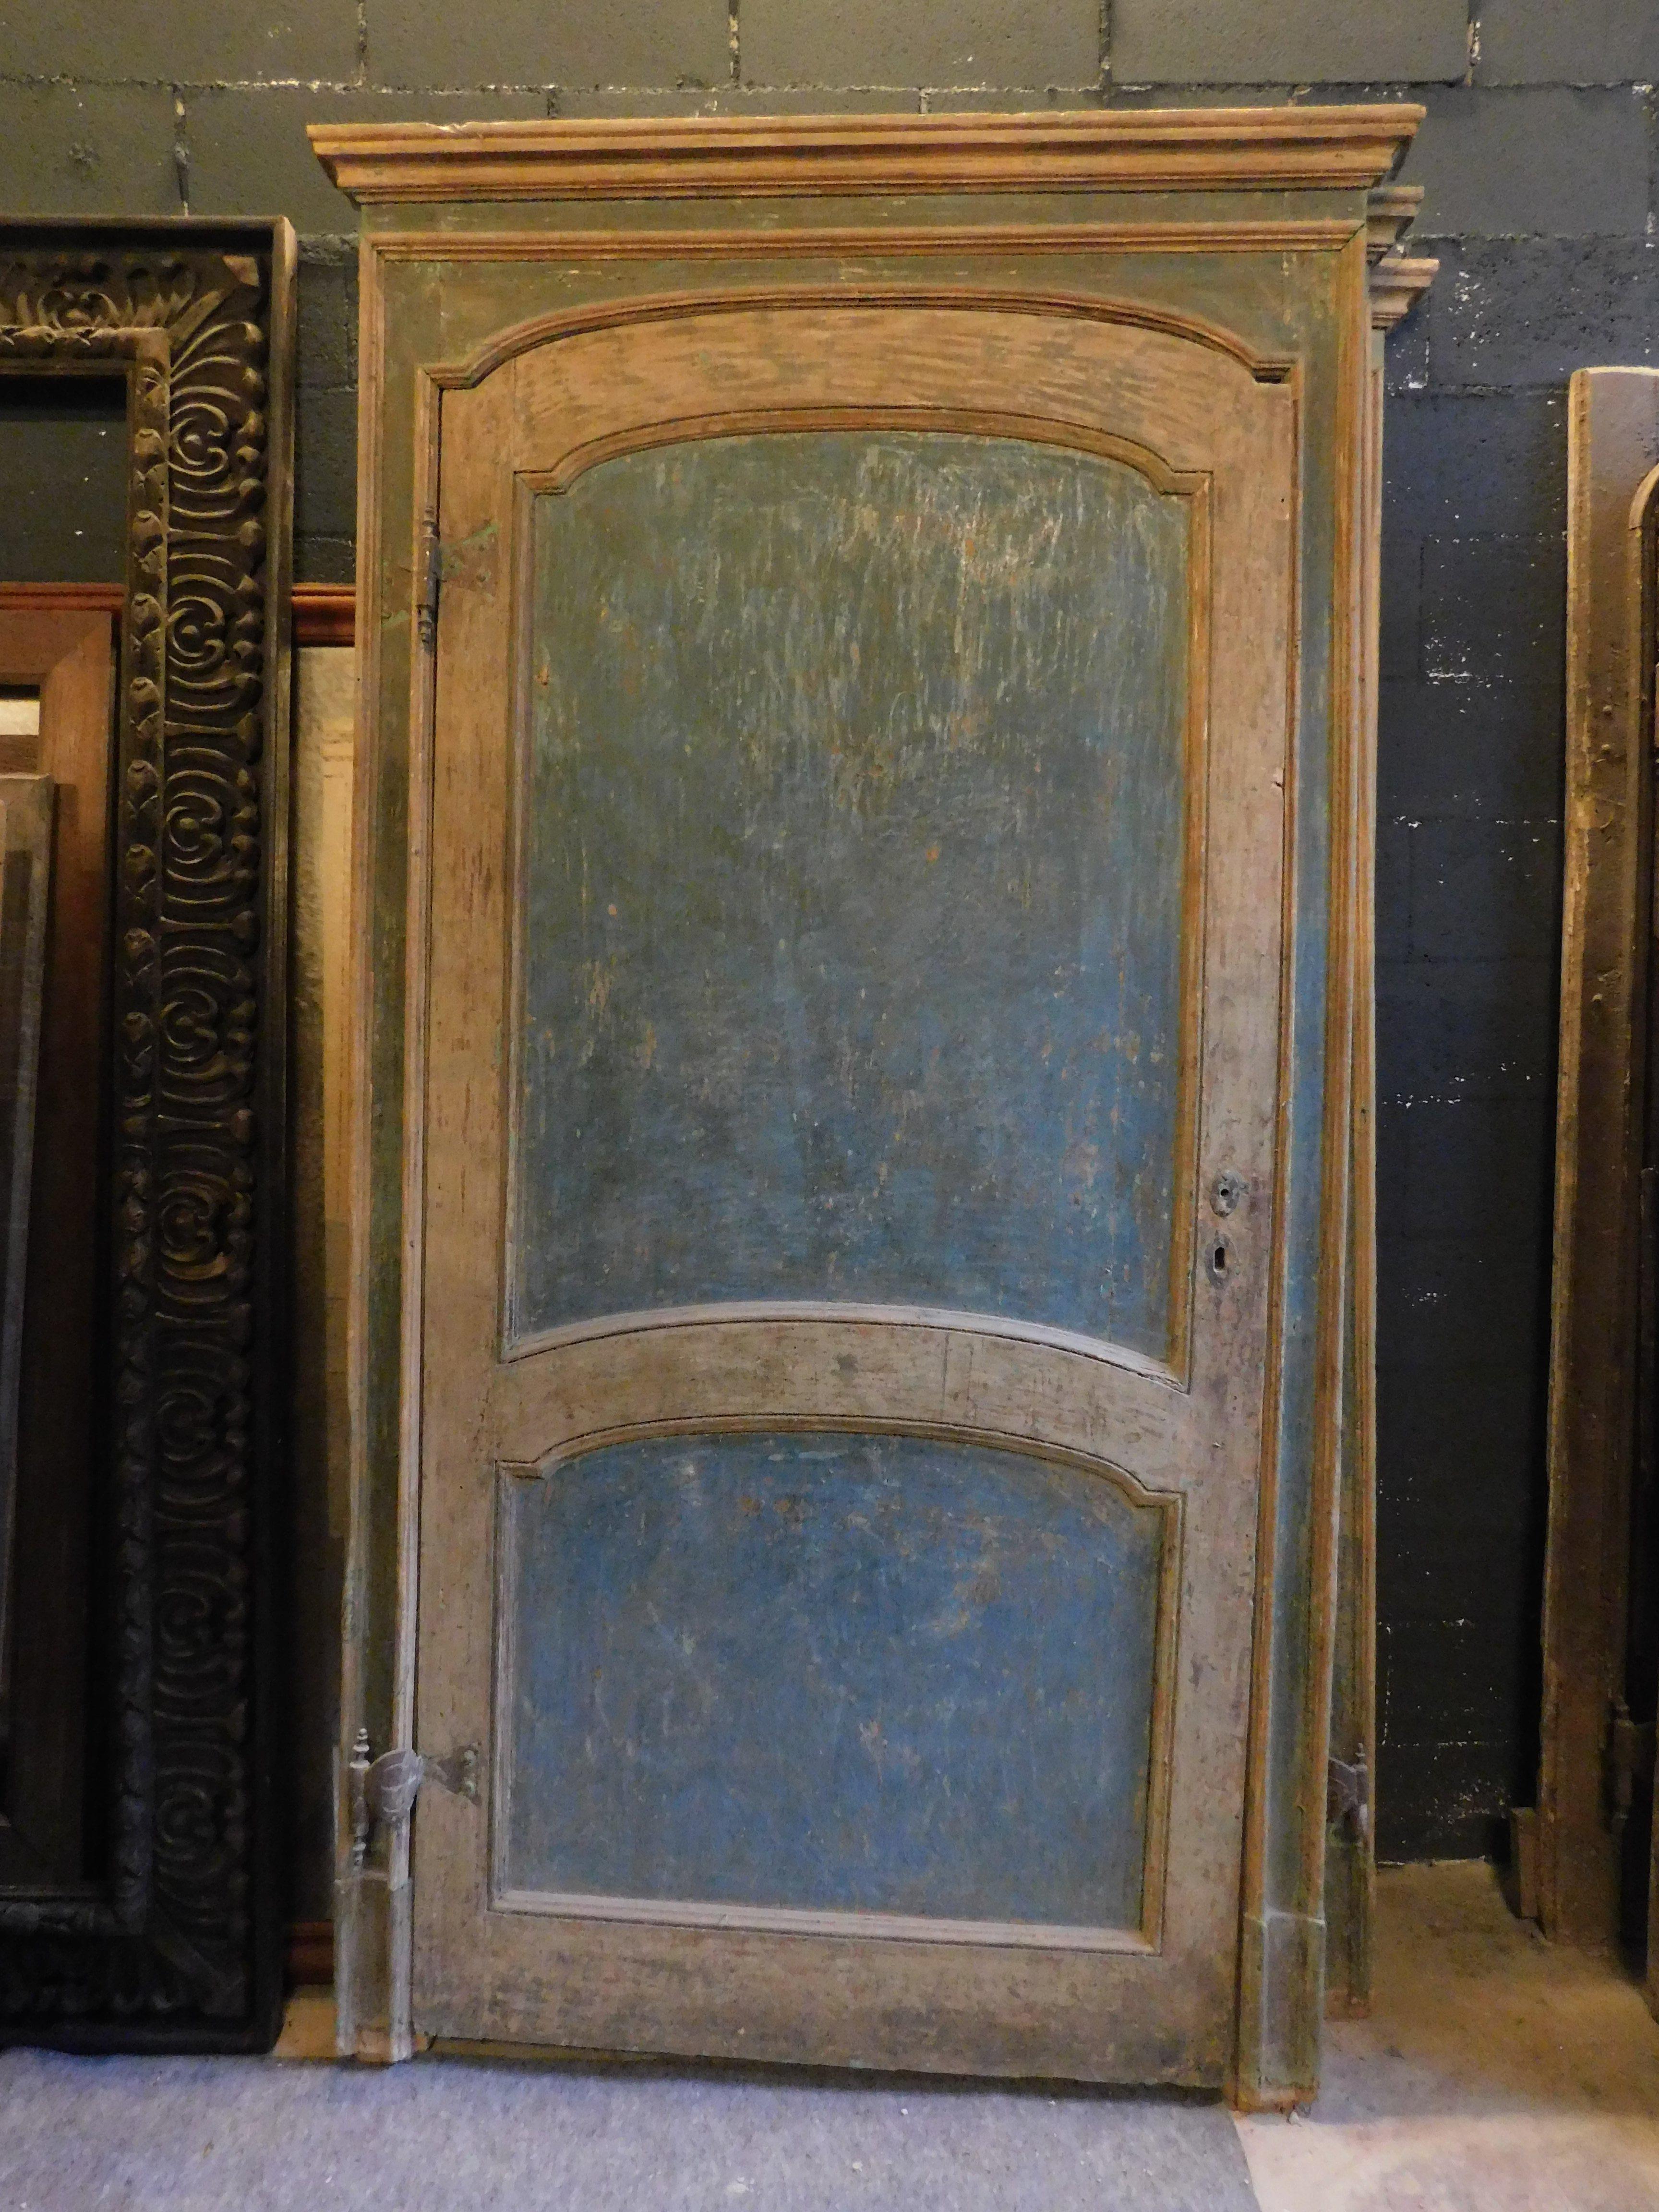 set of 3 antique interior doors, all lacquered and carved with wavy bar, but not identical, only similar, all complete with frame and with gooseneck iron, built in Italy in the middle of the 18th century.
Beautiful and to customize as you like:
door